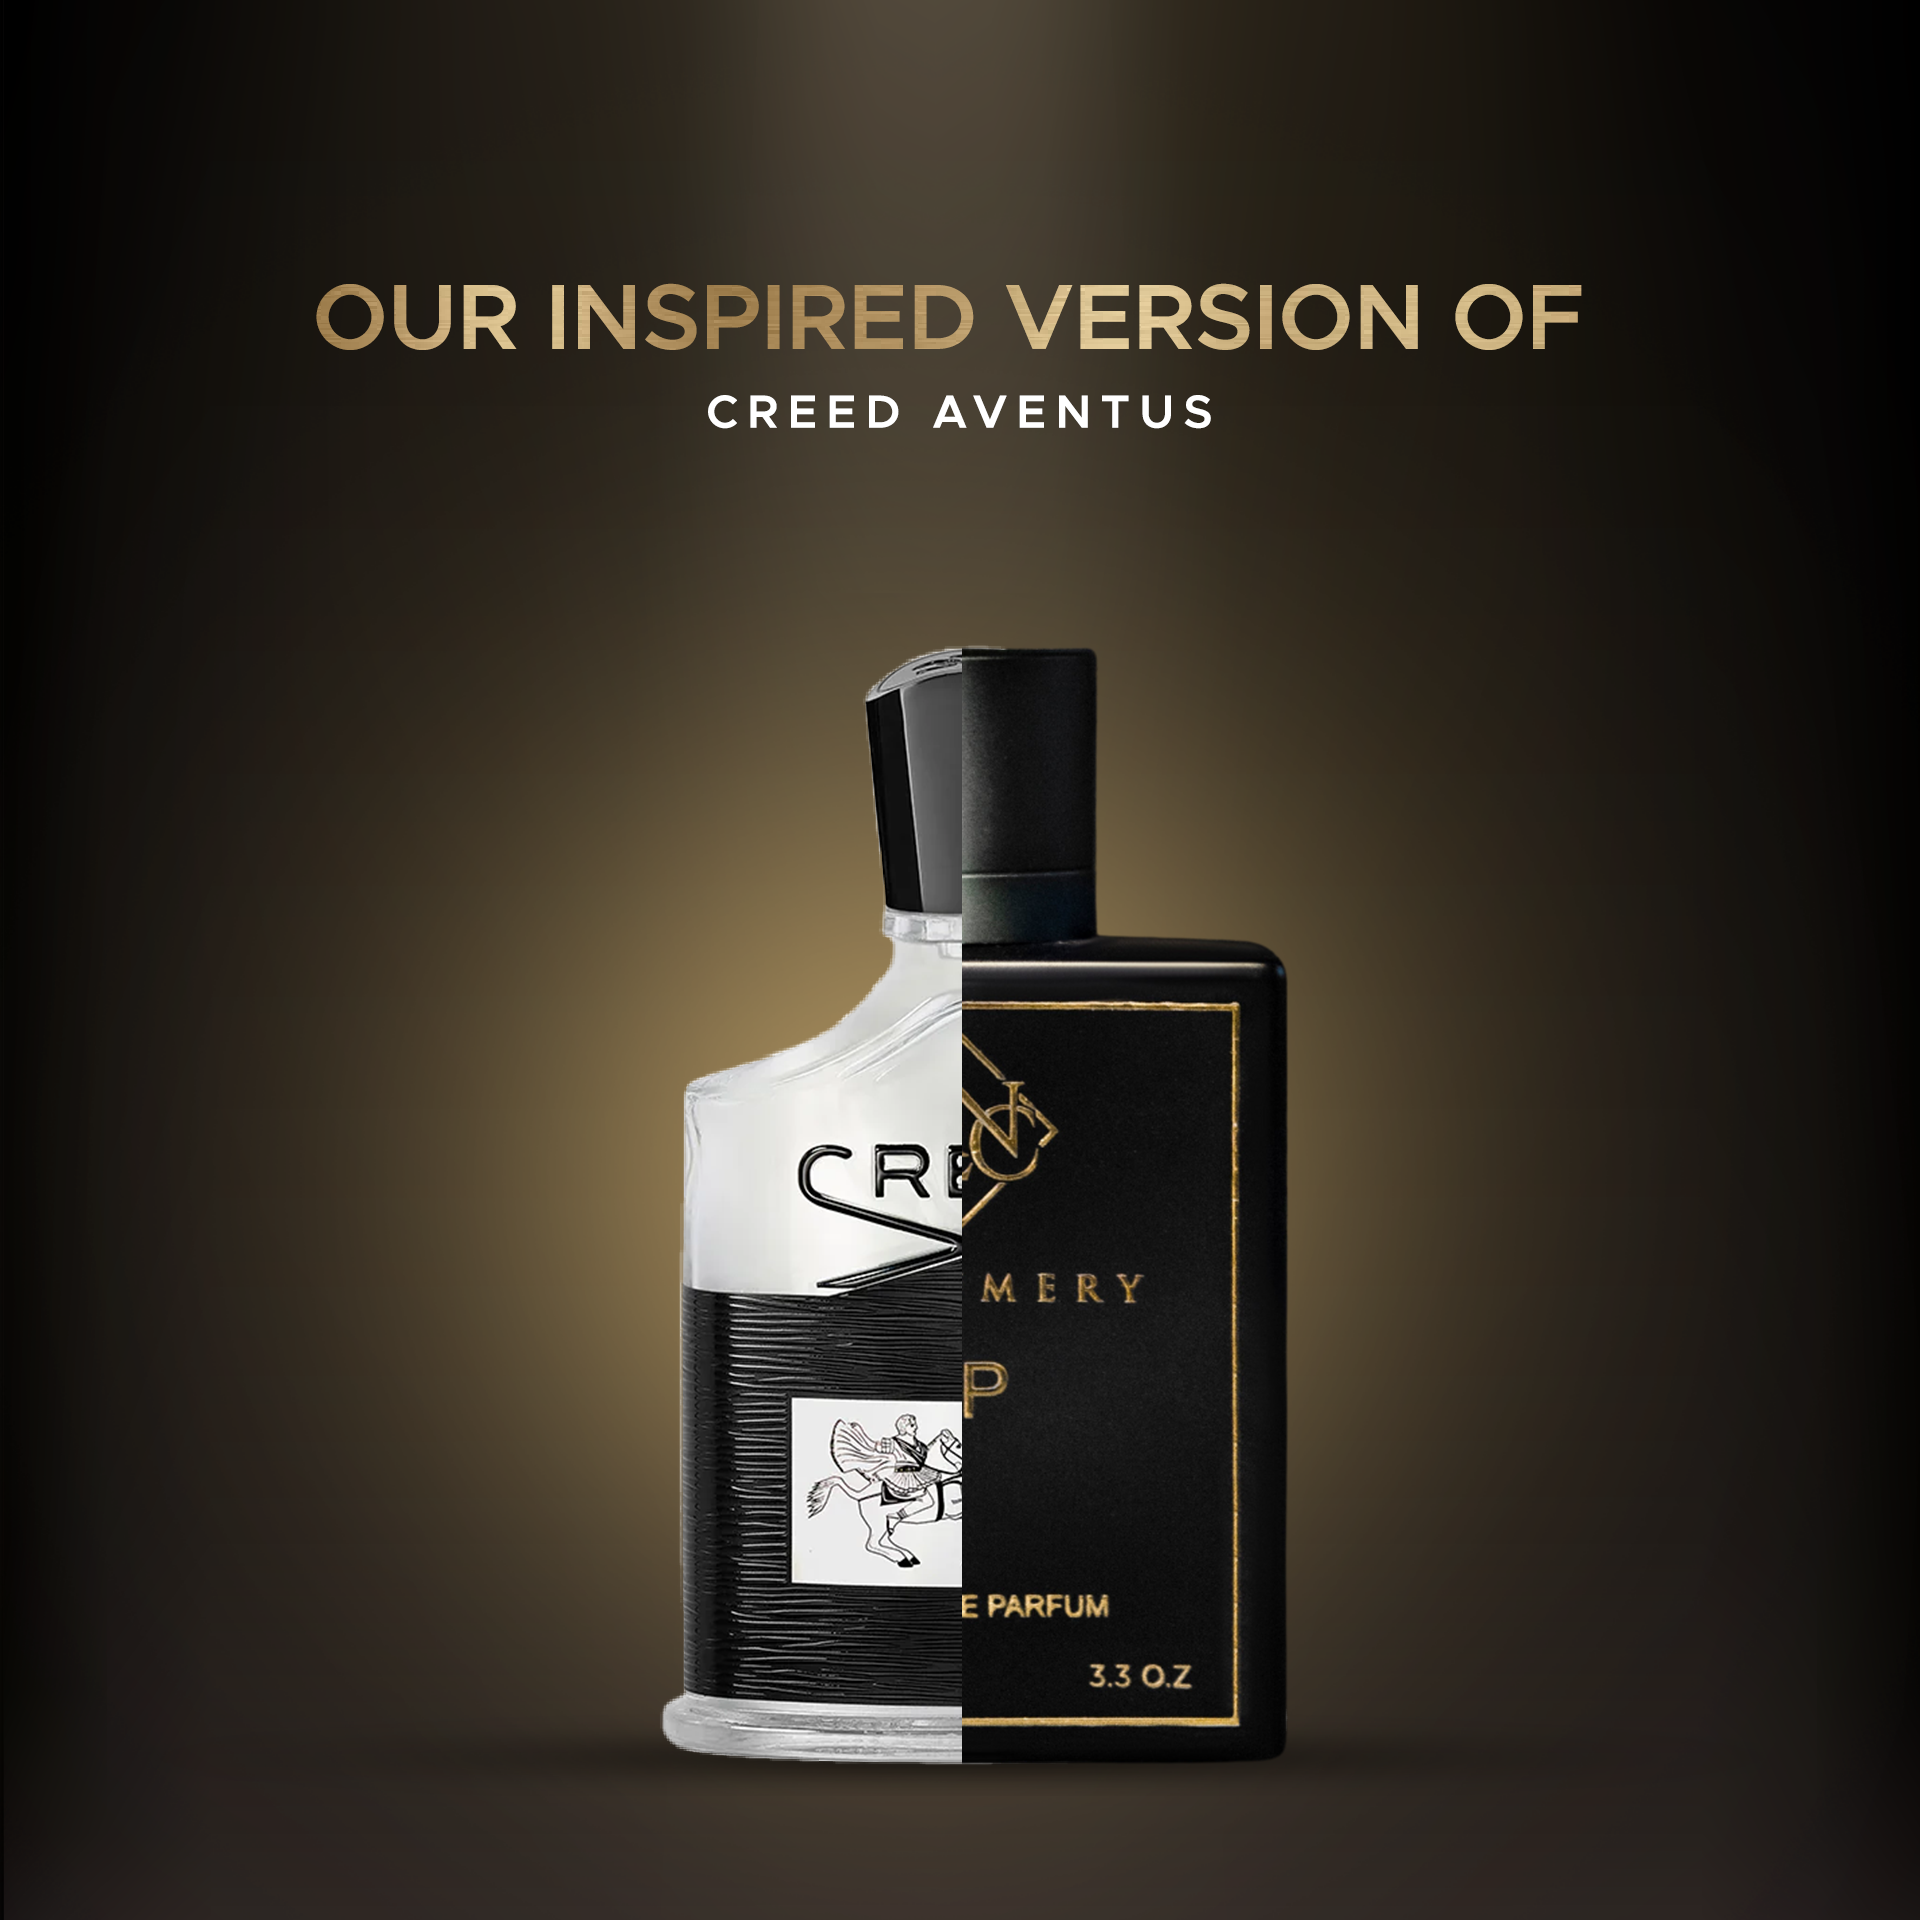 Creed Aventus - Buy XP21 Inspired parfum by Creed Aventus, Creed Aventus perfume price in india, Creed Aventus for men and women, Creed Aventus reviews, Creed Aventus Fragrances Long-Lasting.